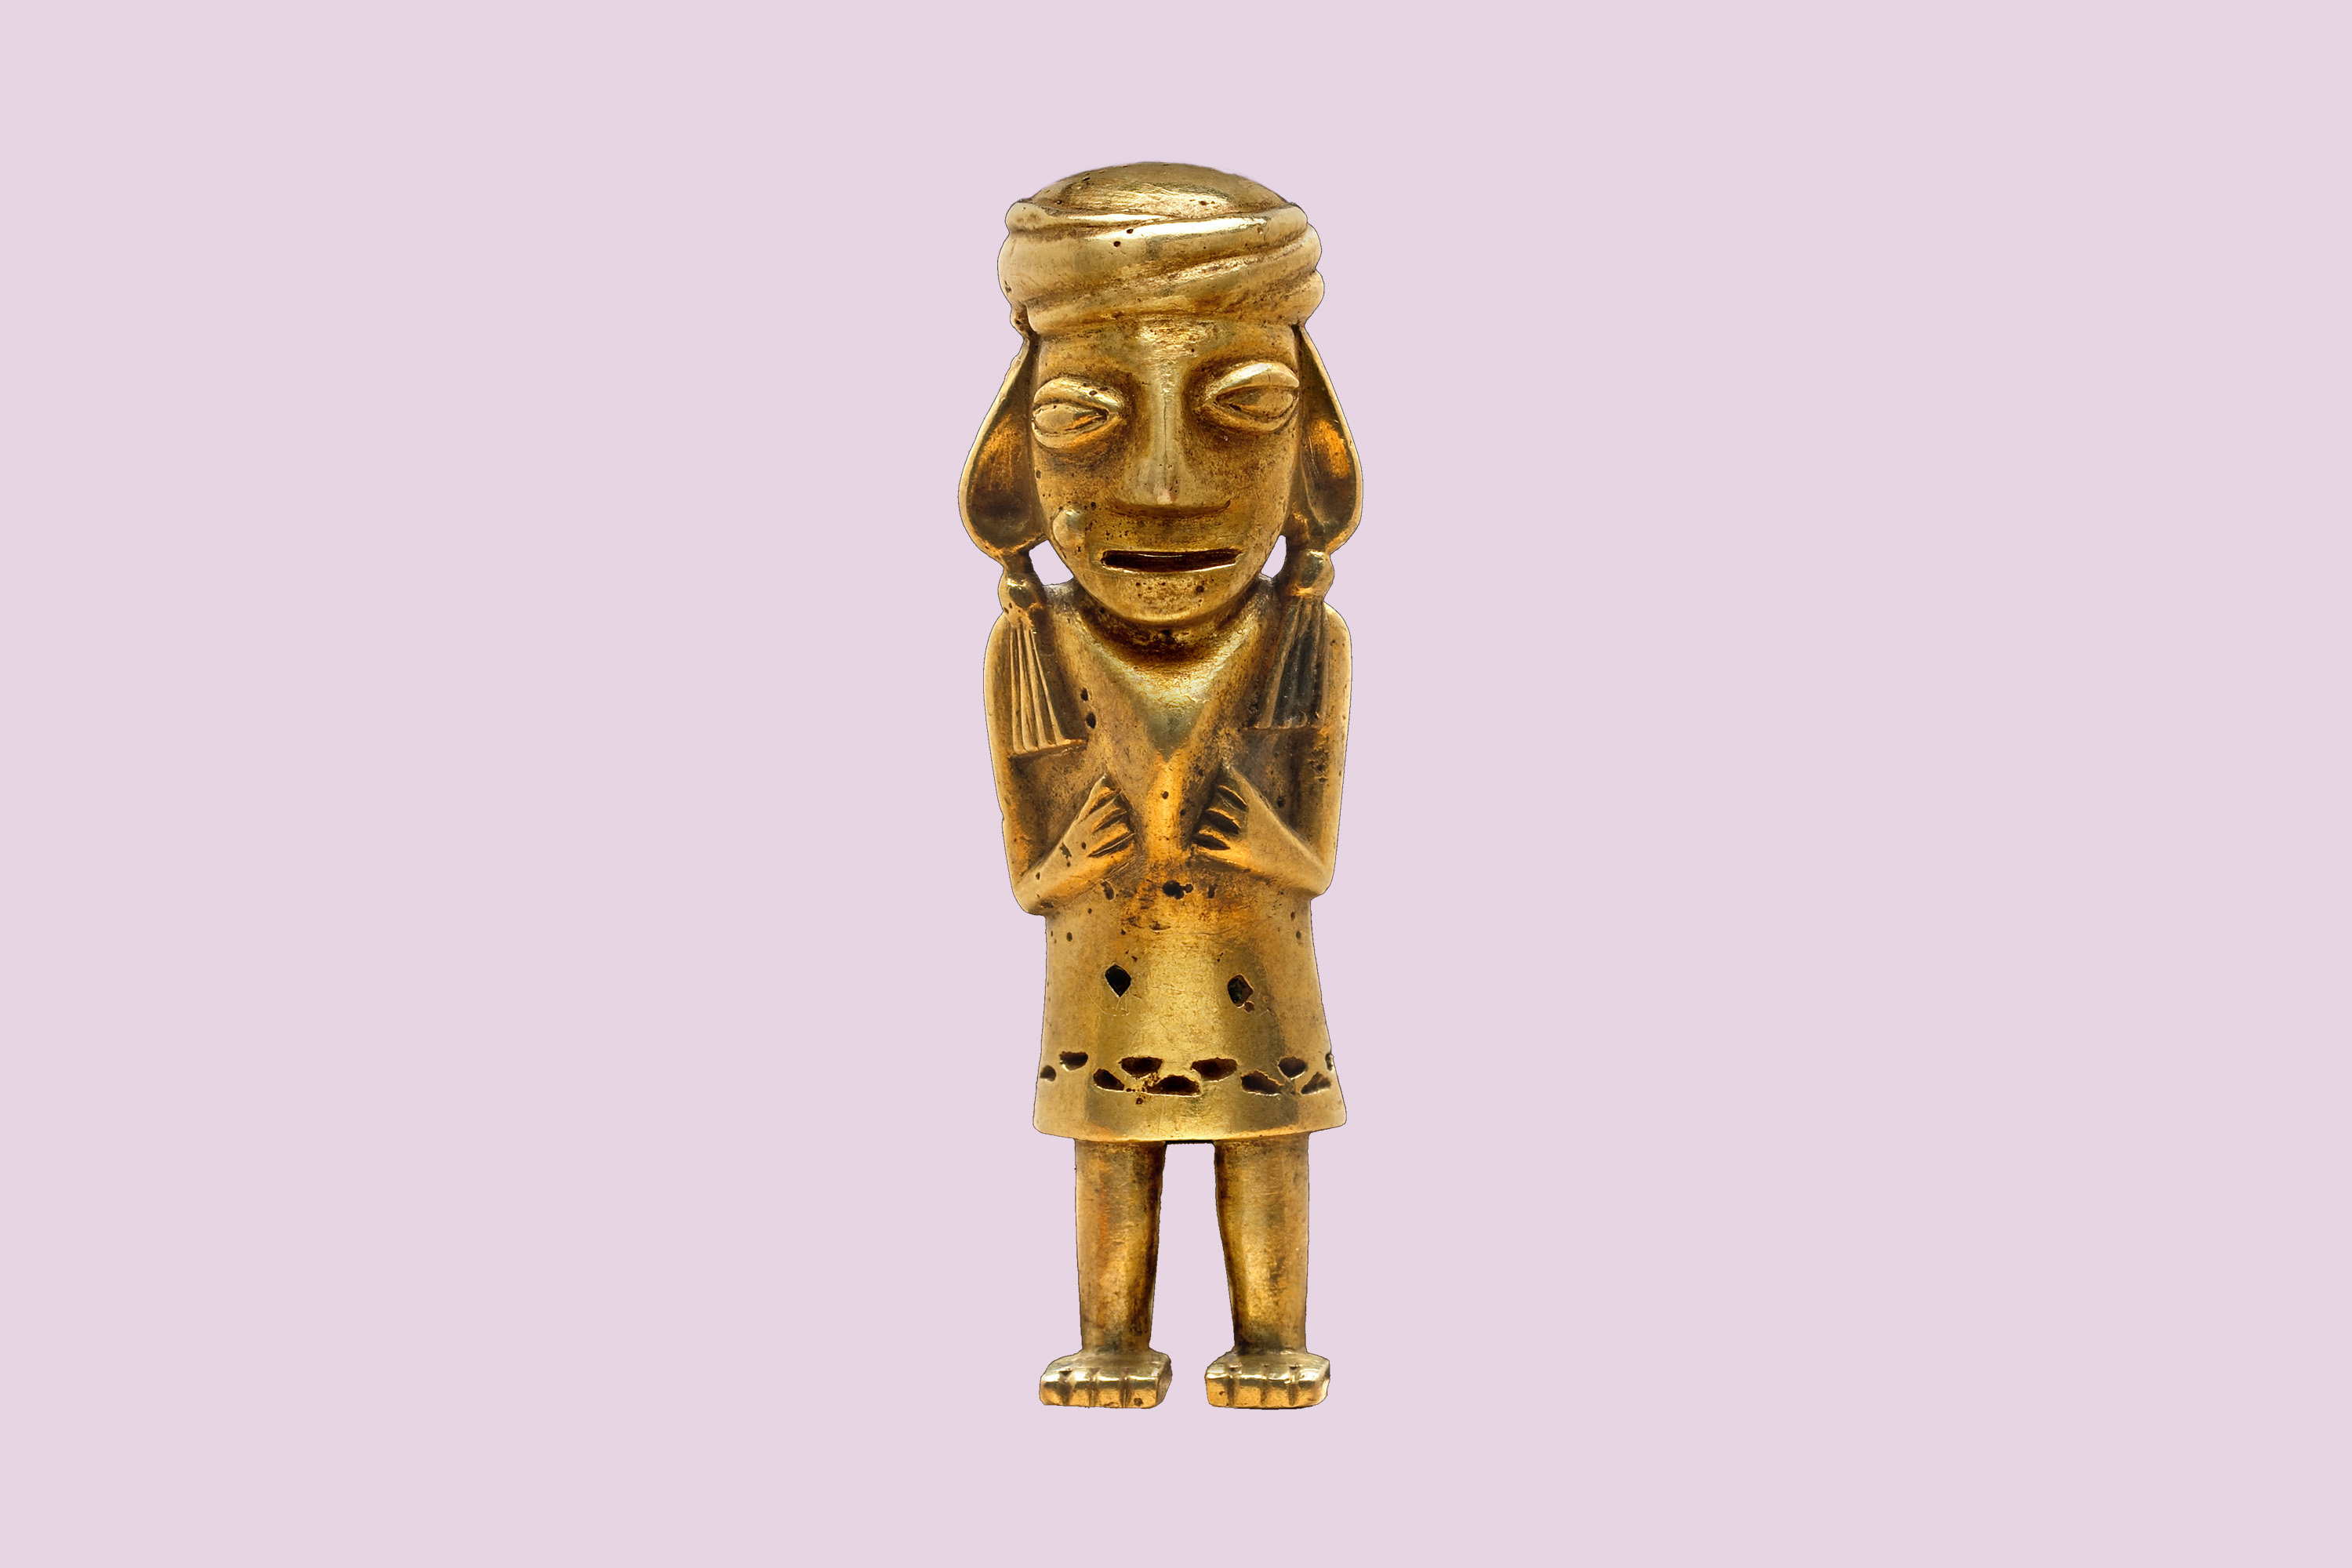 Gold objects, like this figurine from the Inca capital of Cusco, are rare because Spanish conquistadors in the early 1500s took gold from the city, melted it into bars, and exported it back to Europe.